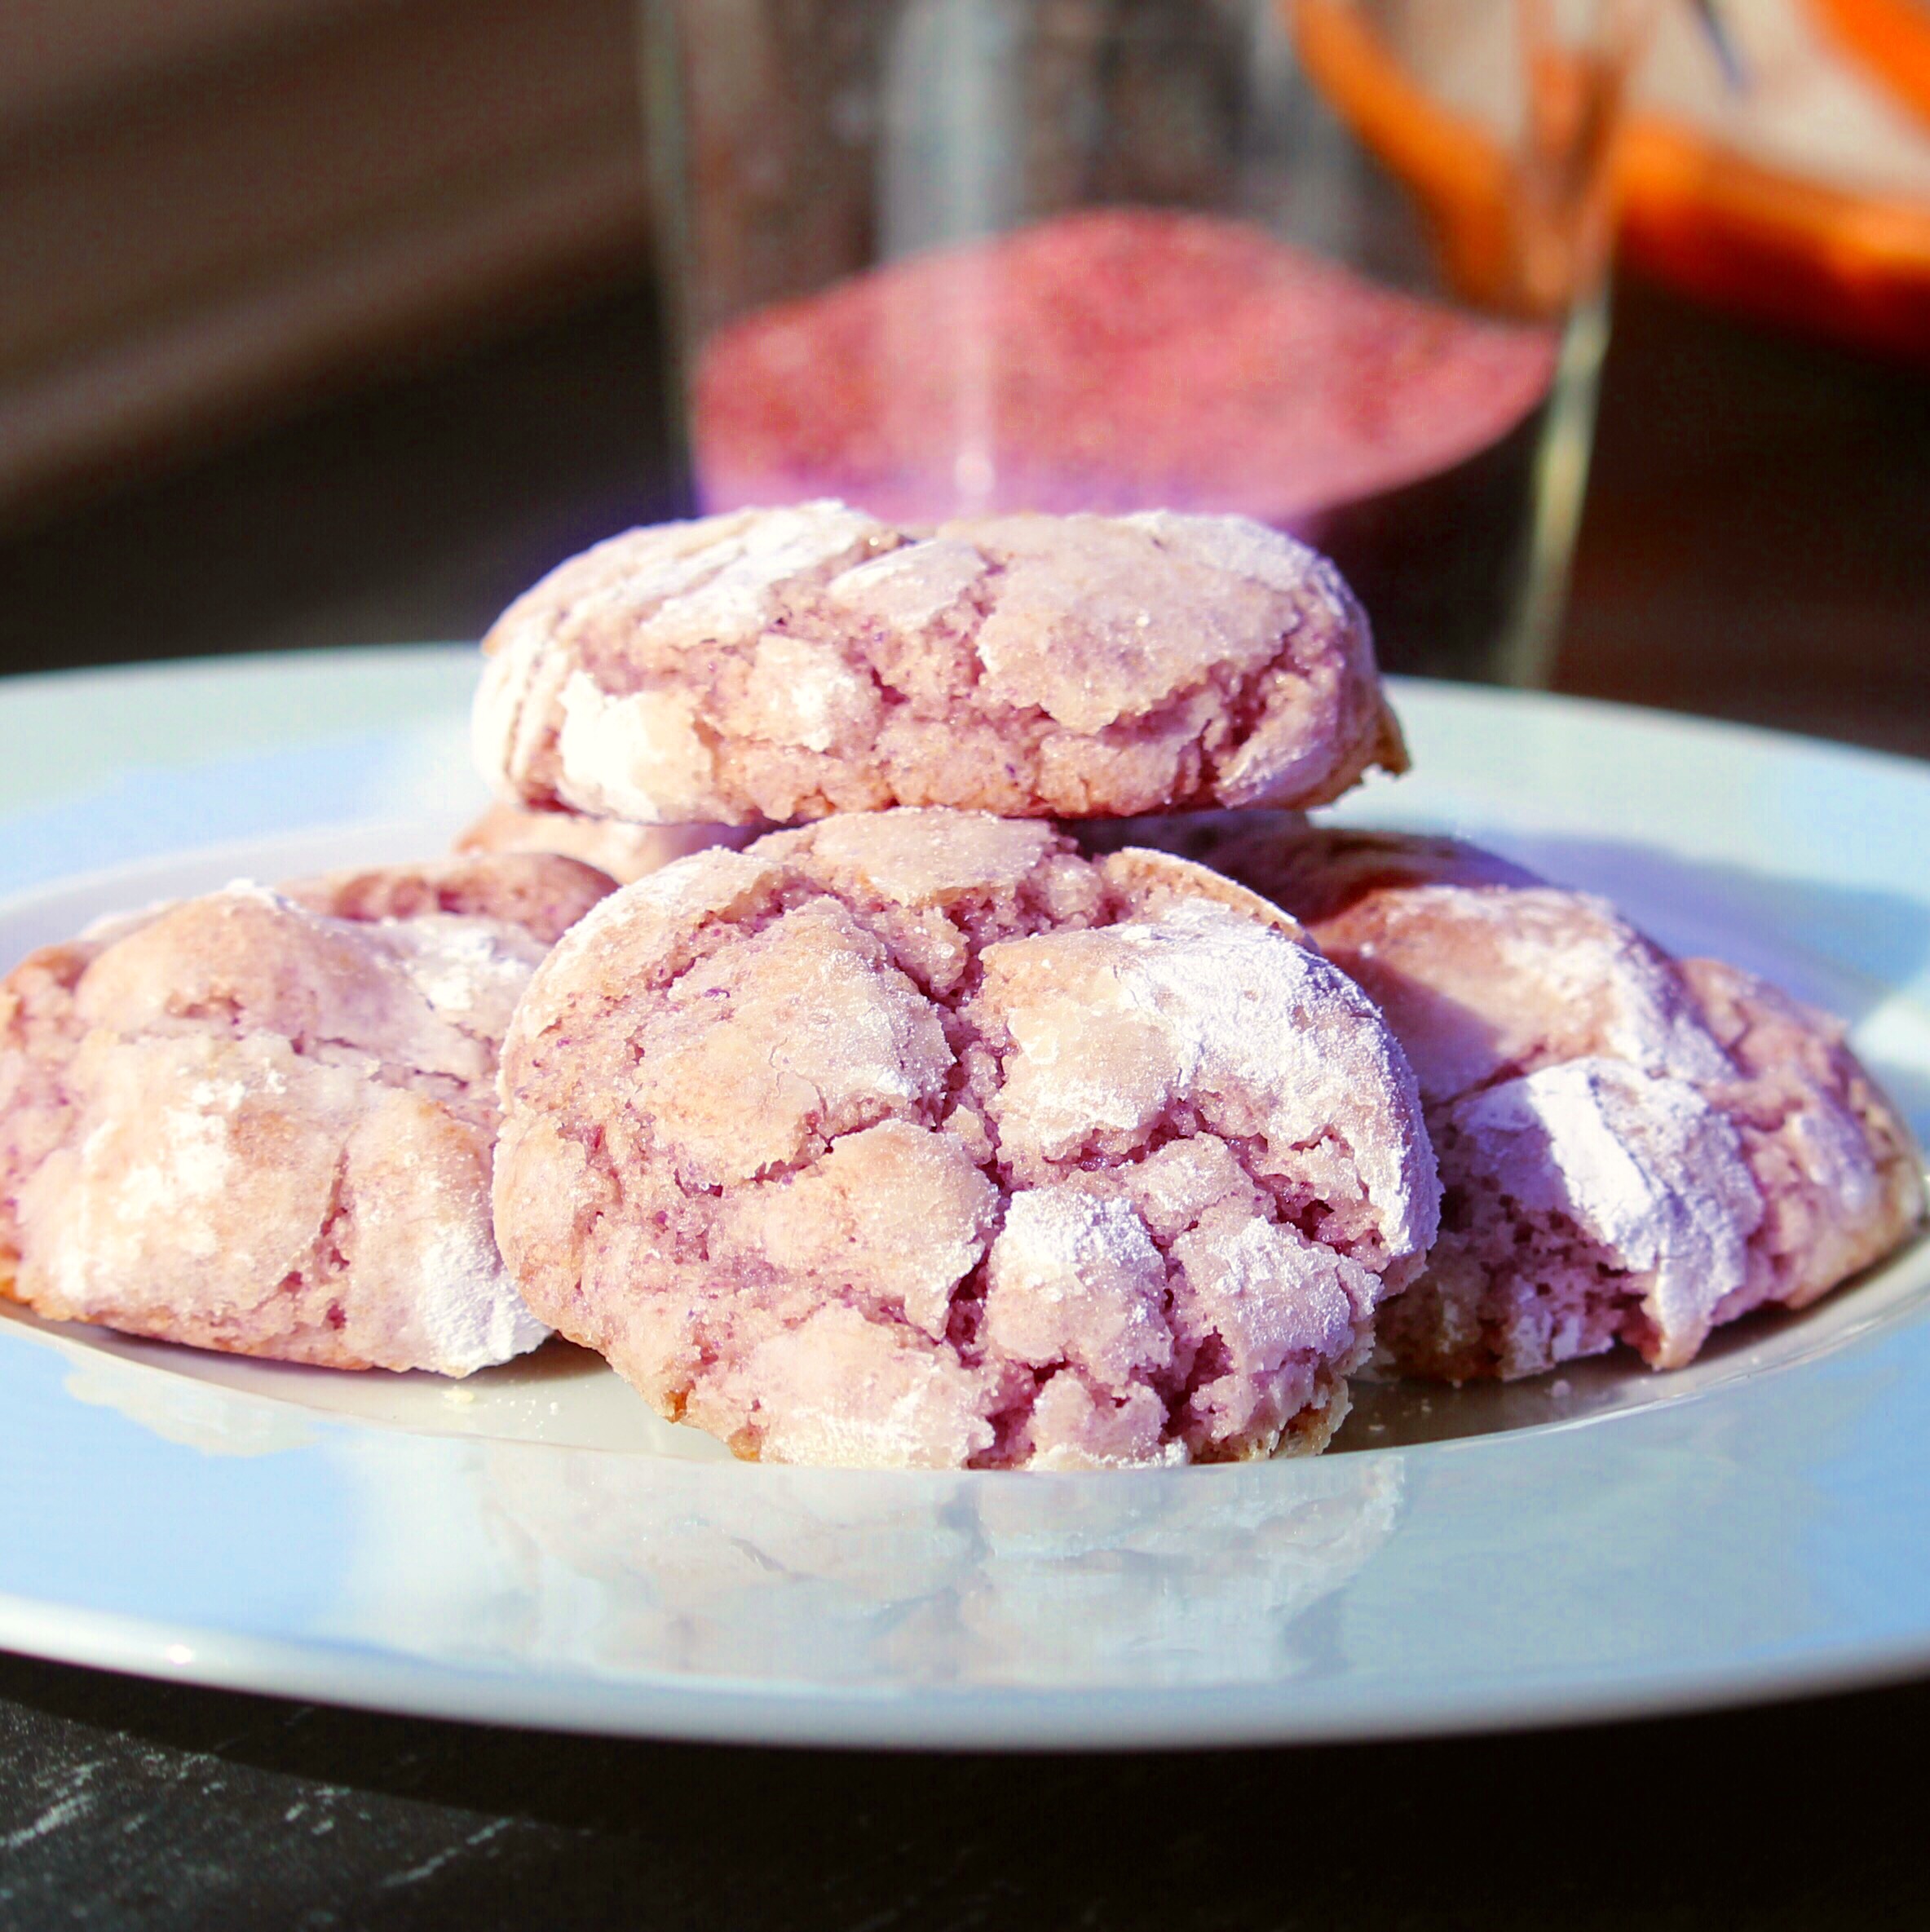 Easy and Delicious Purple Yam (Ube) Cookies